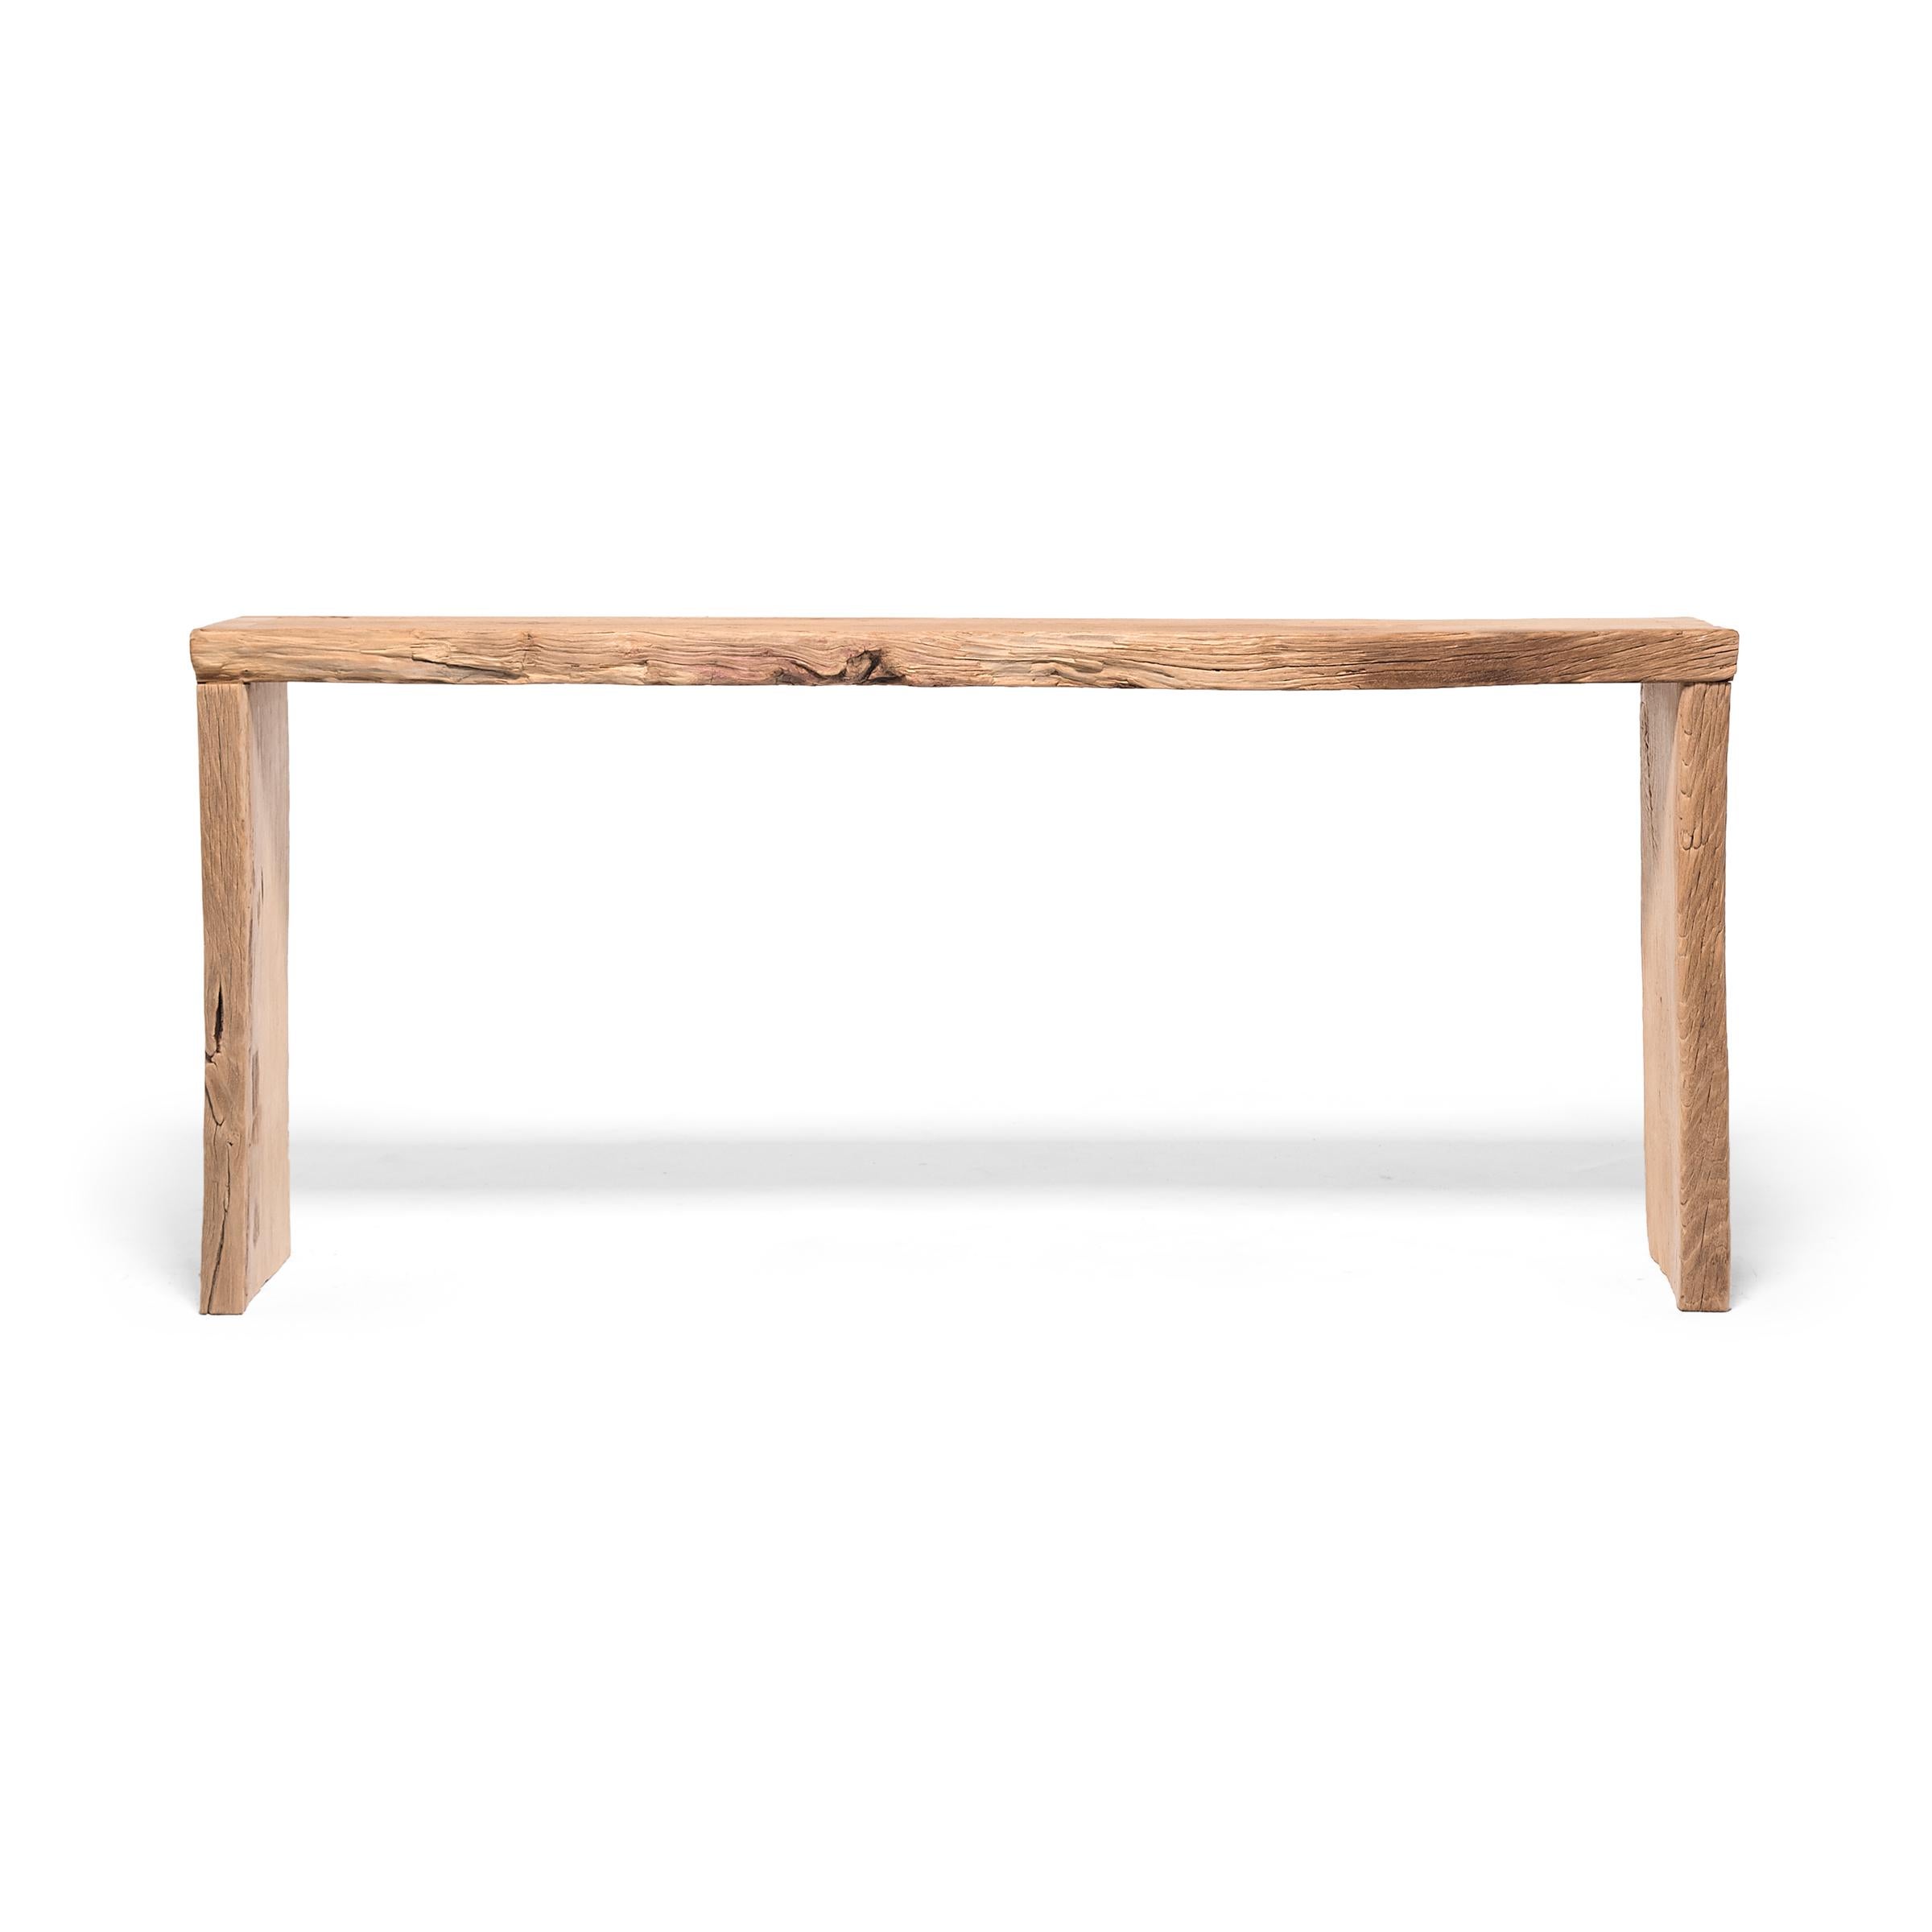 Made of wood reclaimed from Qing-dynasty architecture, this contemporary altar table is a celebration of wabi-sabi style. In the spirit of traditional Chinese joinery, the corners are finished with dovetail joints for a modern waterfall design. The